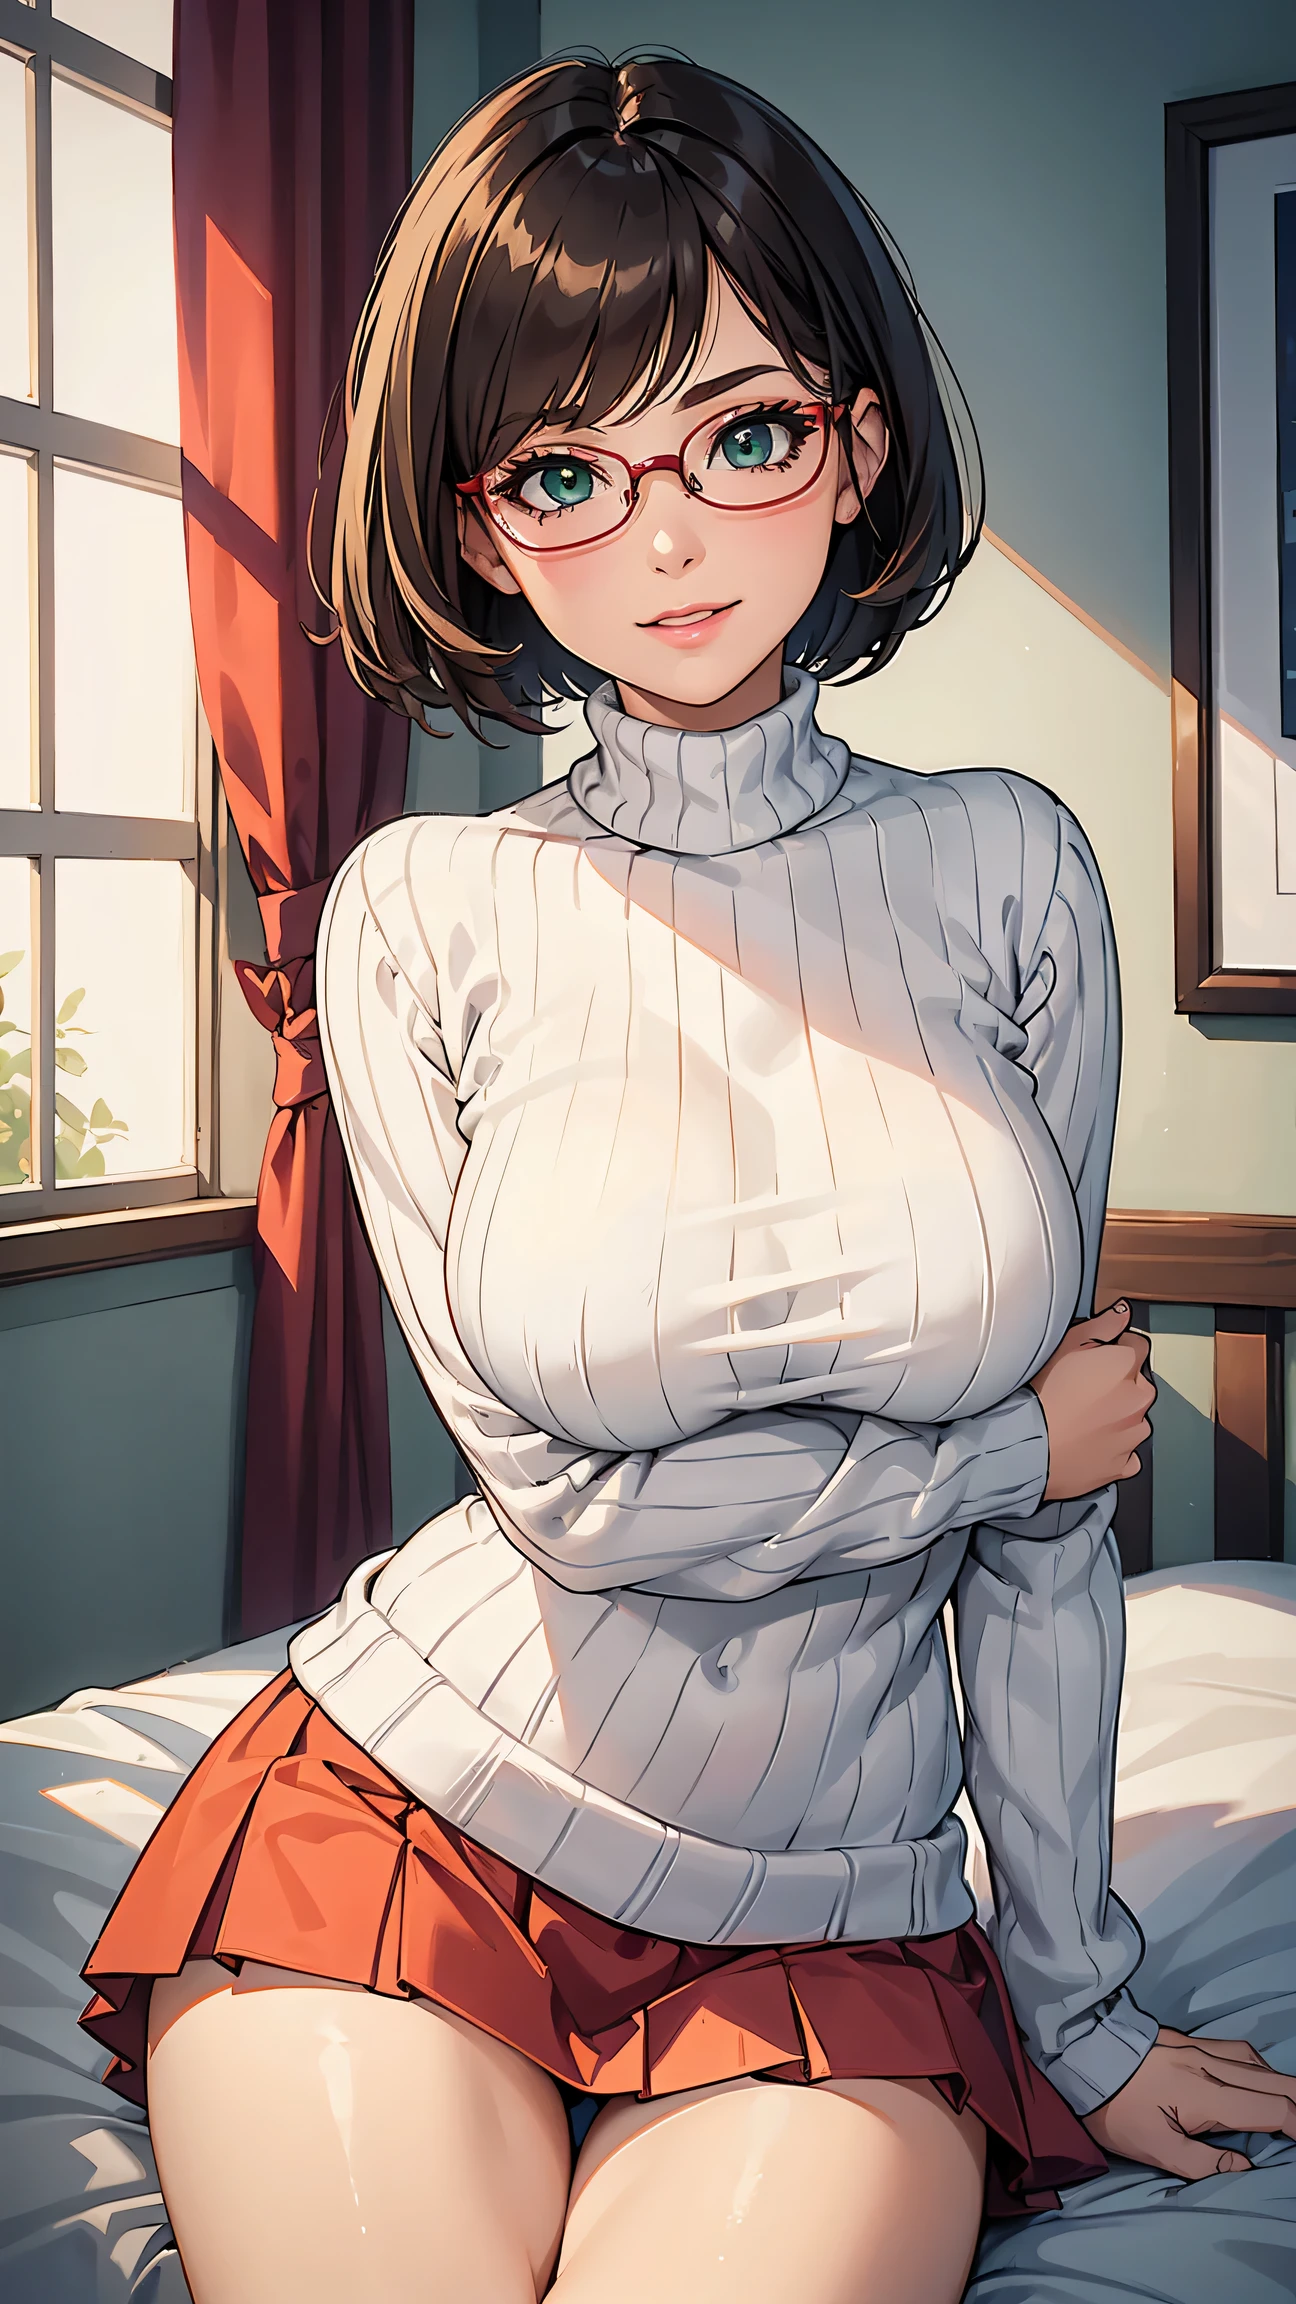 HD, 8k quality, masterpiece, Velma, dream girl huge , beautiful face, kissing lips, short bob hairstyle, long bangs, perfect makeup, realistic face, detailed eyes, green eyes, brunette hair, eyelashes, smile grin, bedroom, lying on bed, showing cameltoe, eyes at viewer, orange knitted turtleneck sweater, clear lens glasses, red school girl skirt, view from below,